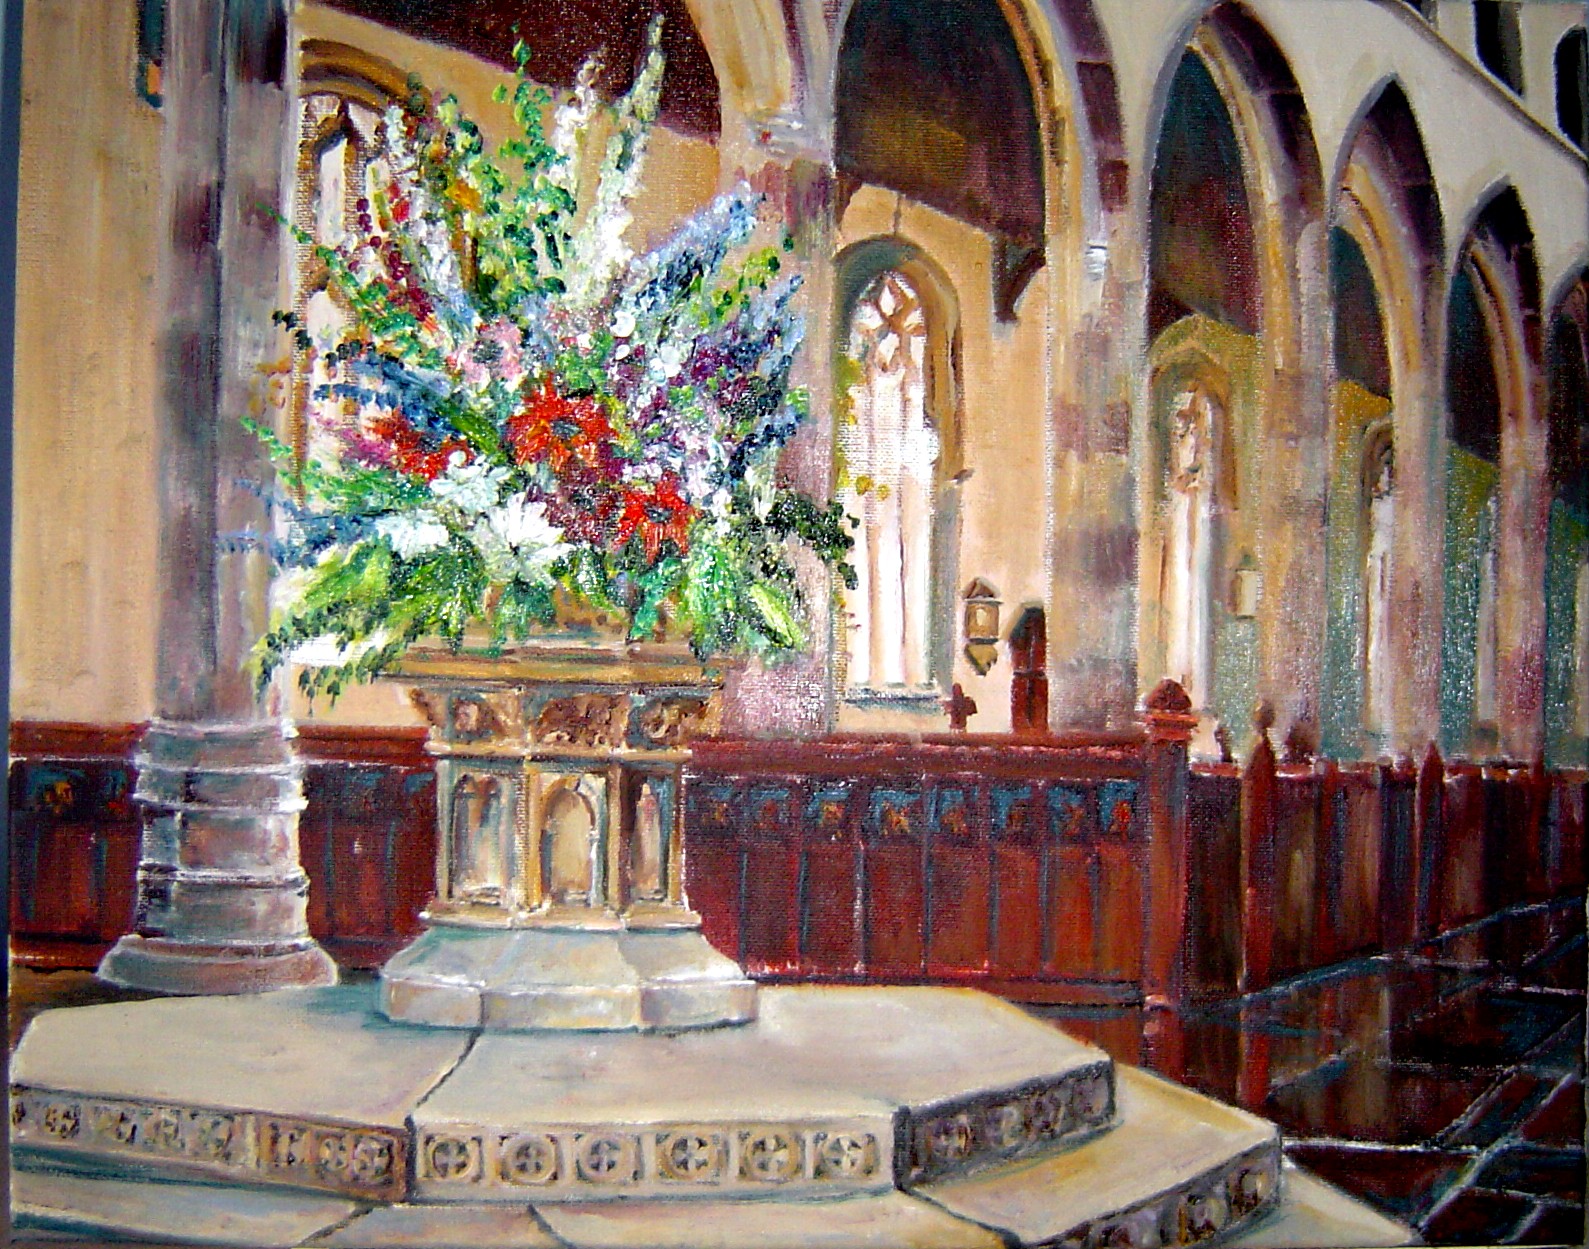 [St+Nics+Chapel+font+4th+stage+with+flowers.JPG]